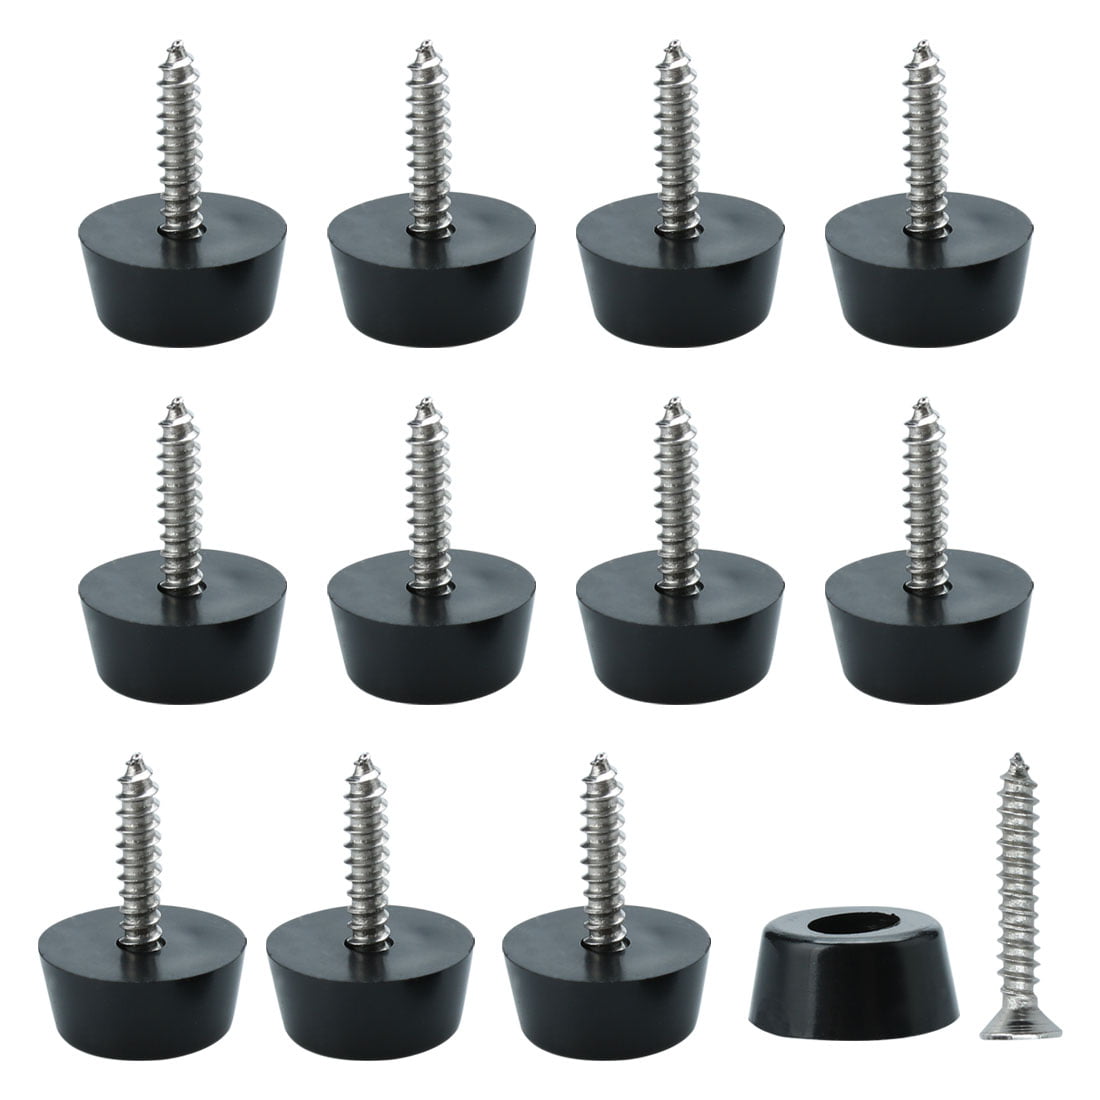 10x Conical Recessed Rubber Feet Bumpers Pads For Furniture Table Chair Desk-TCA 